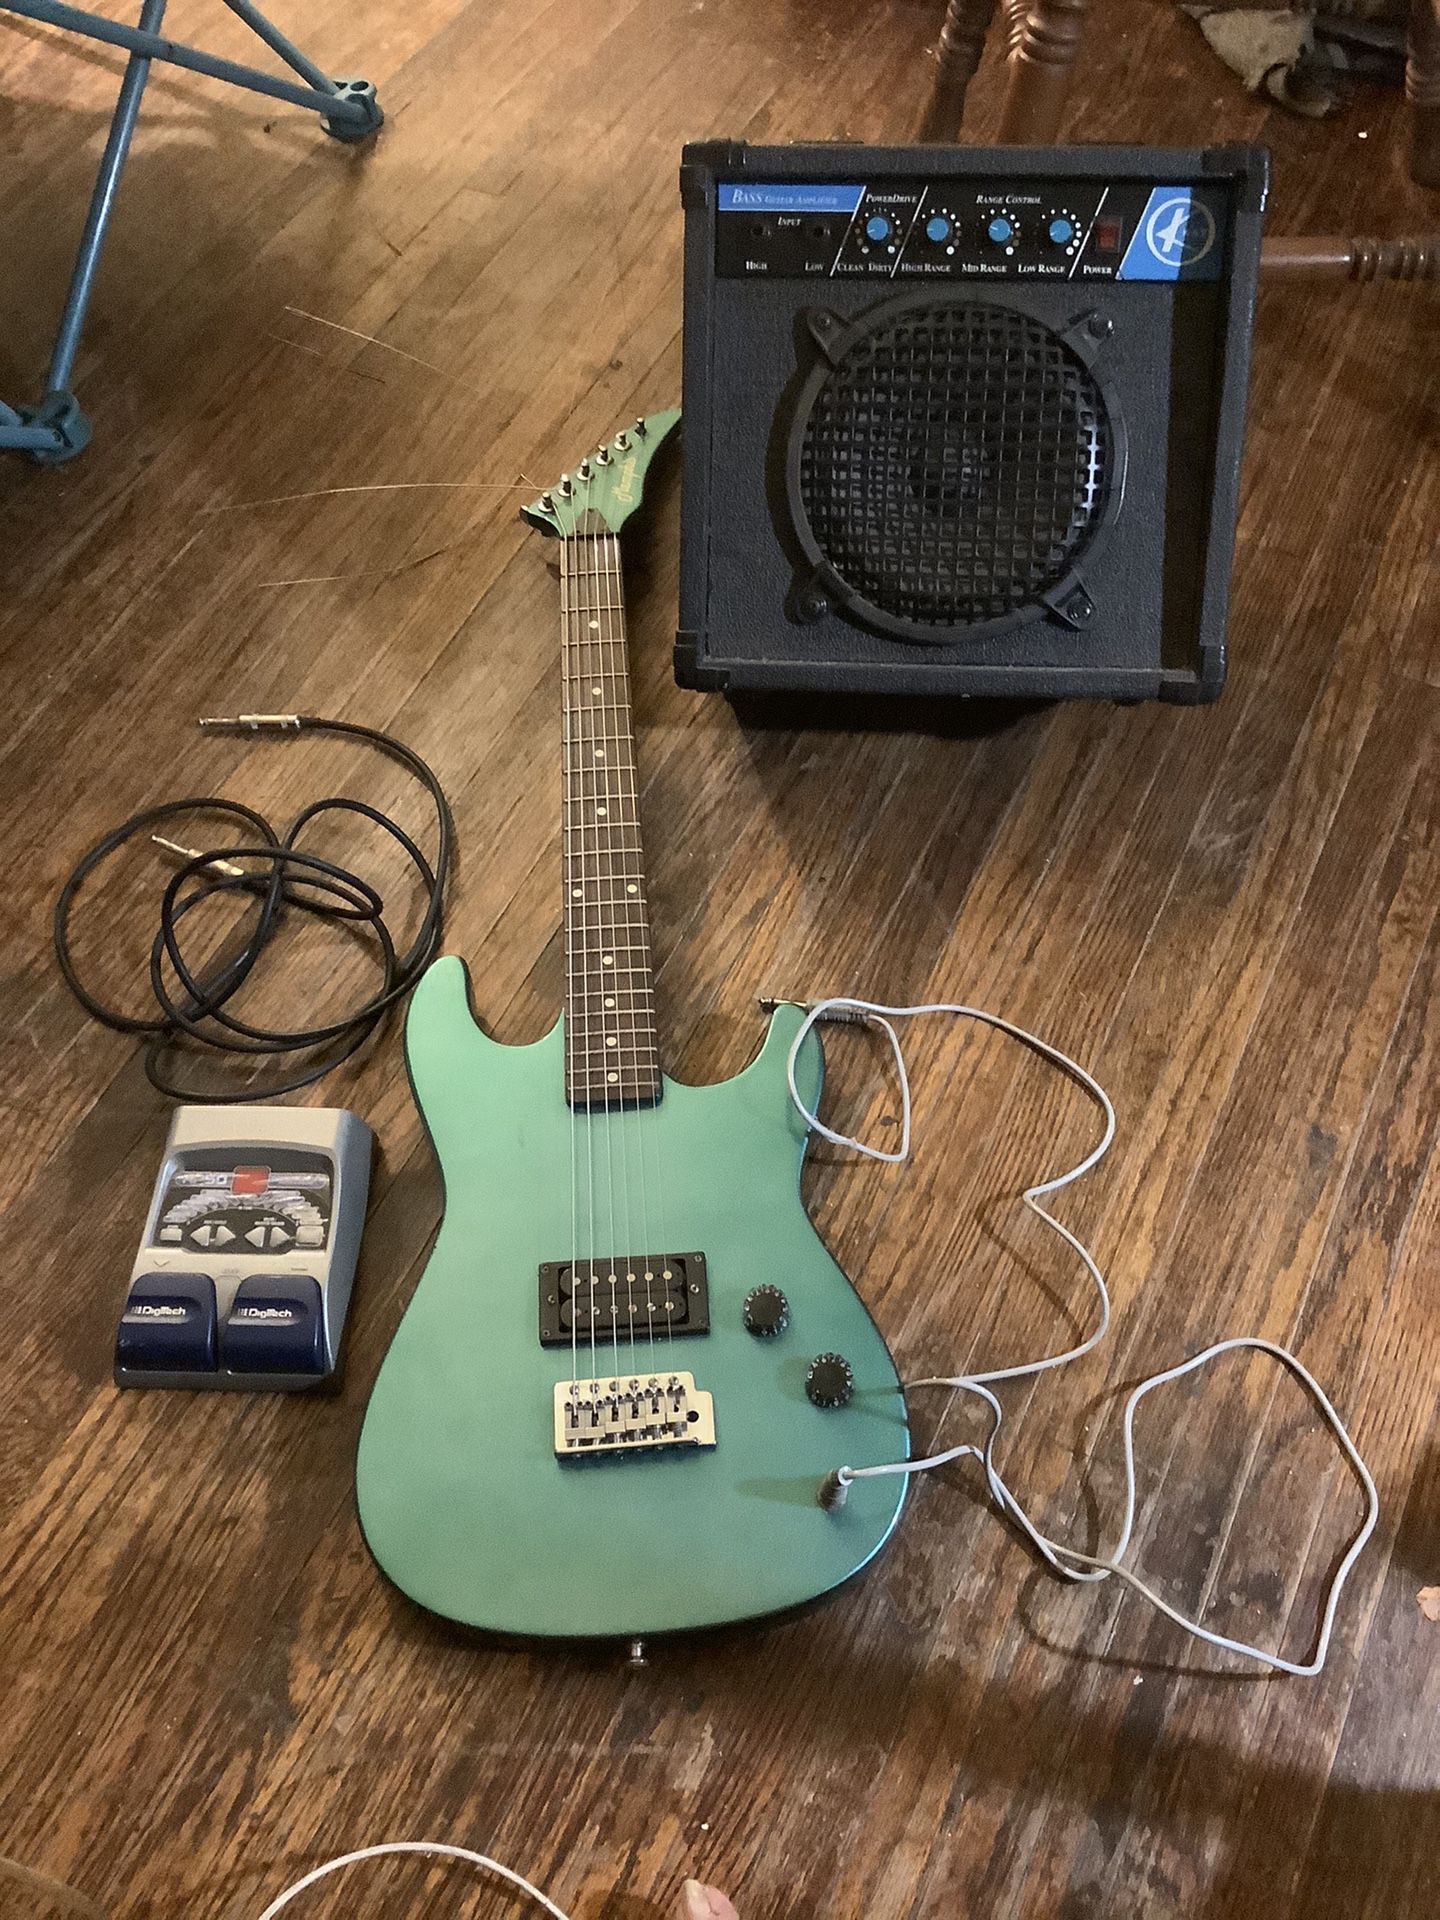 Guitar and amp and foot pedal